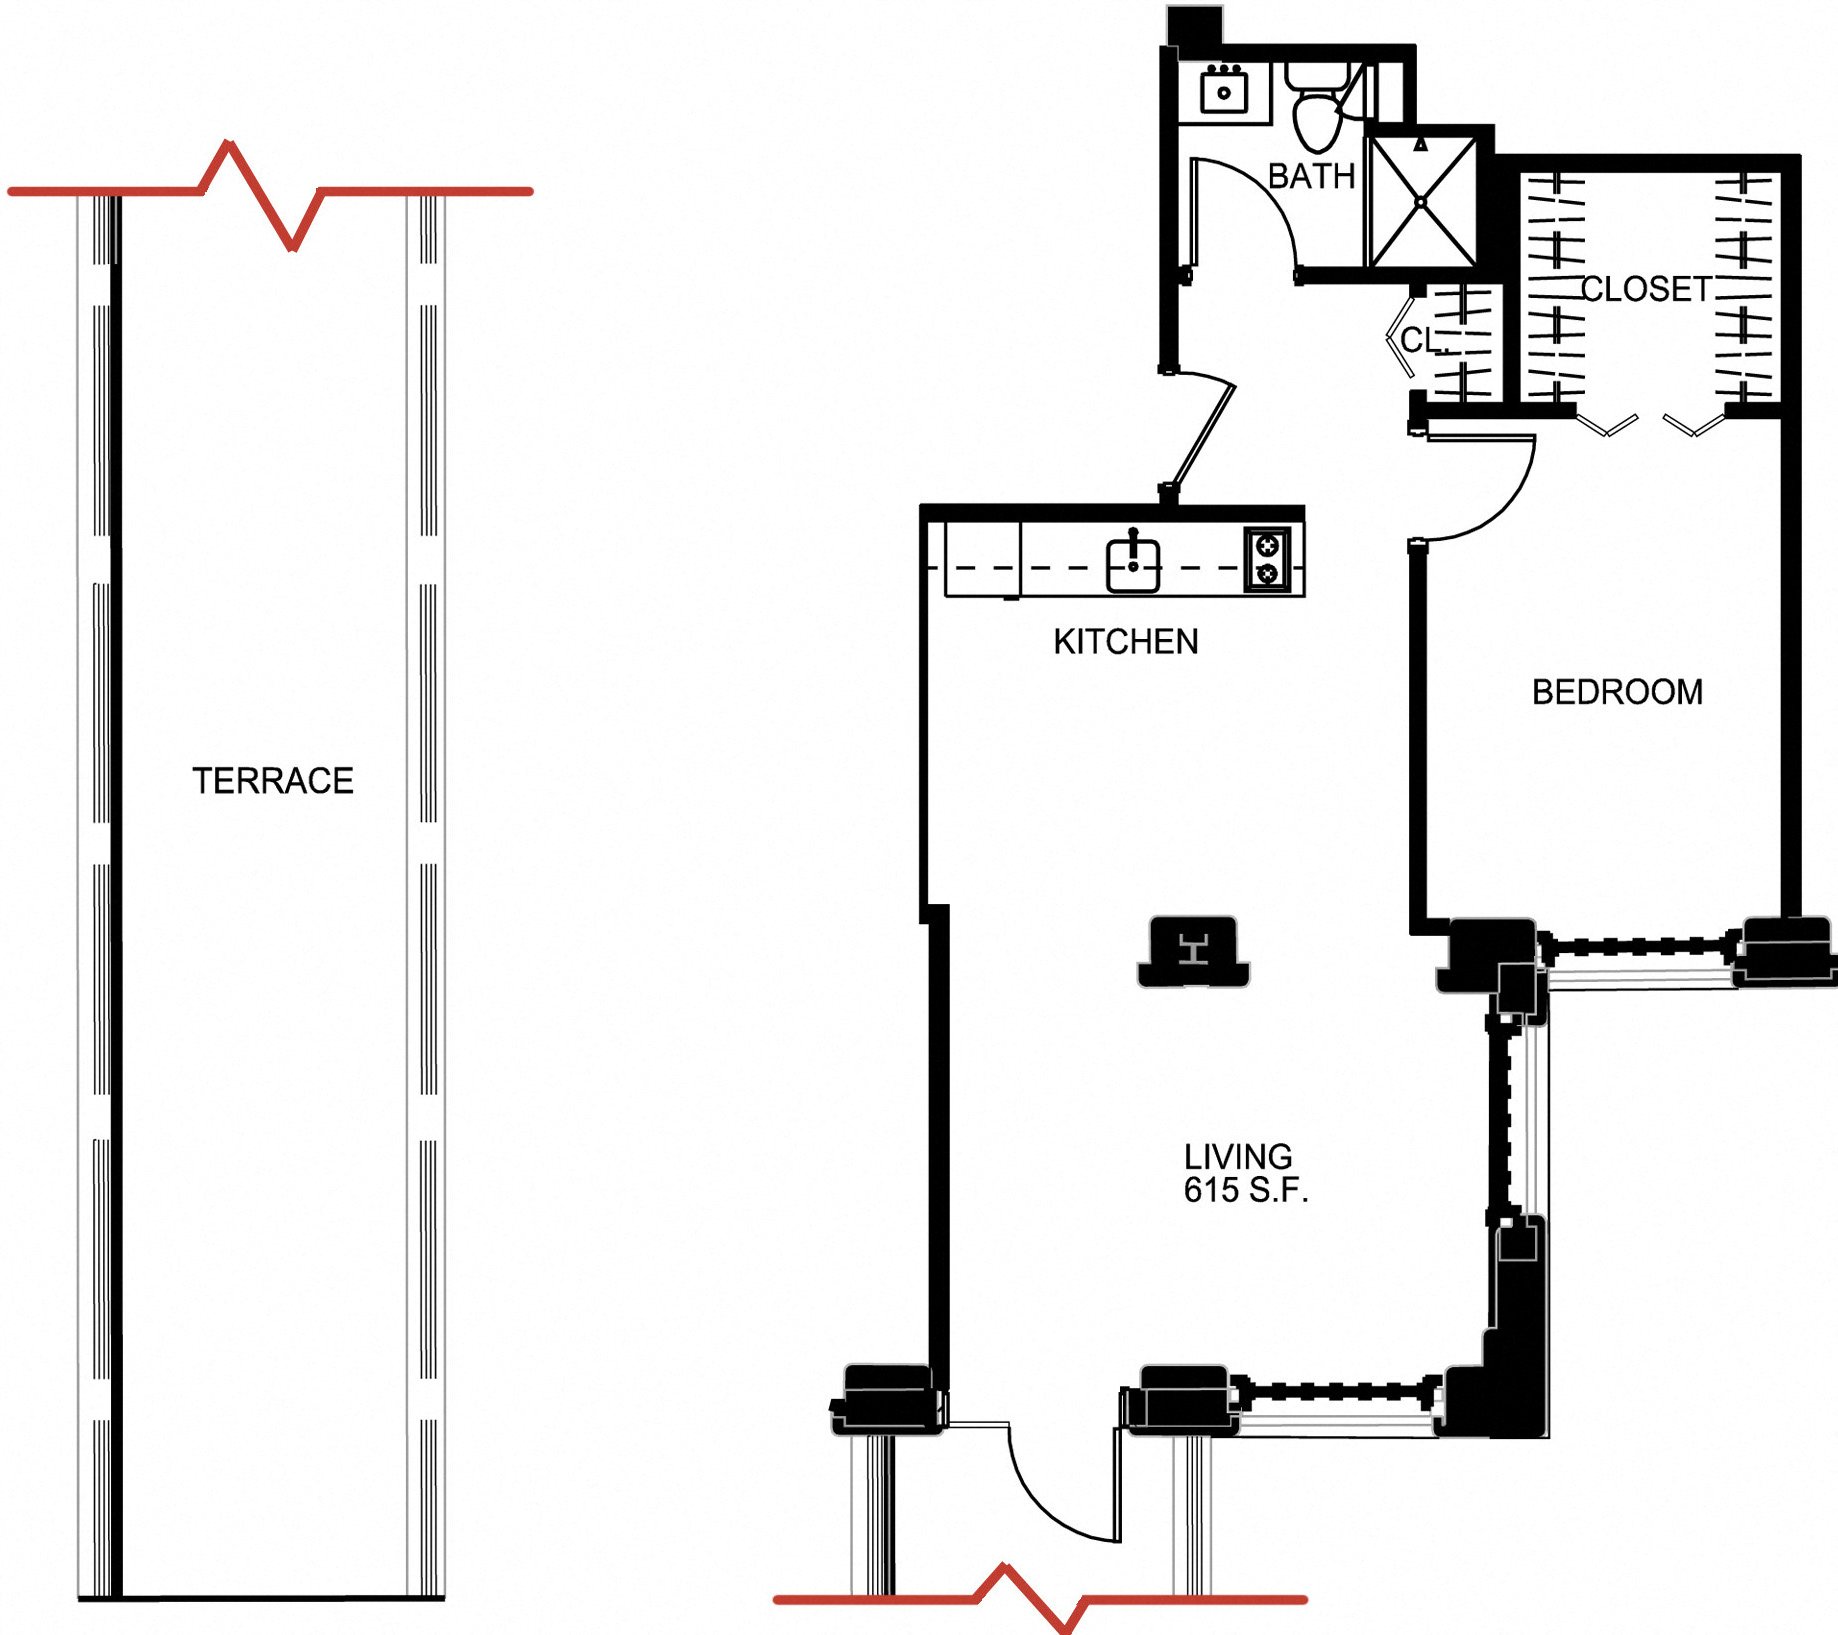 Floorplan for Apartment #S2311, 1 bedroom unit at Halstead Providence